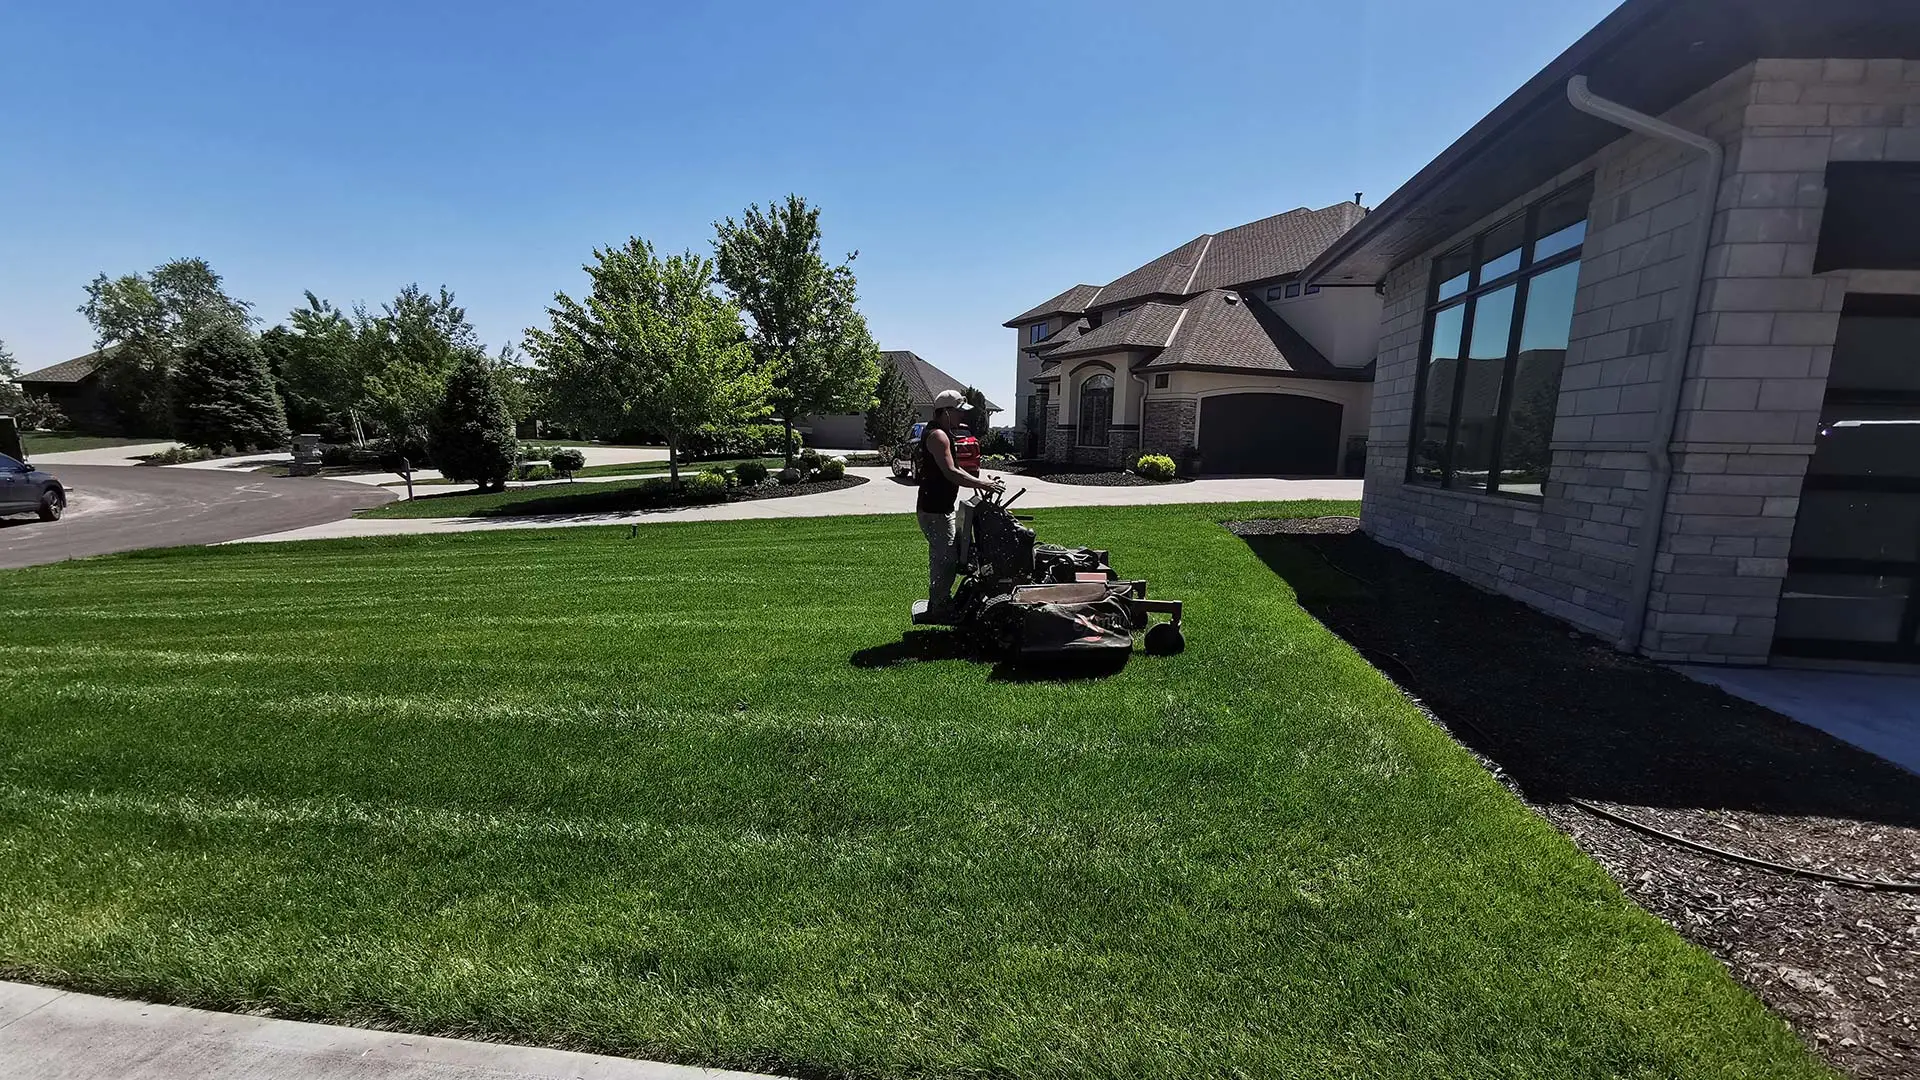 Our landscaper on a lawn mower near a home in Valley, NE.